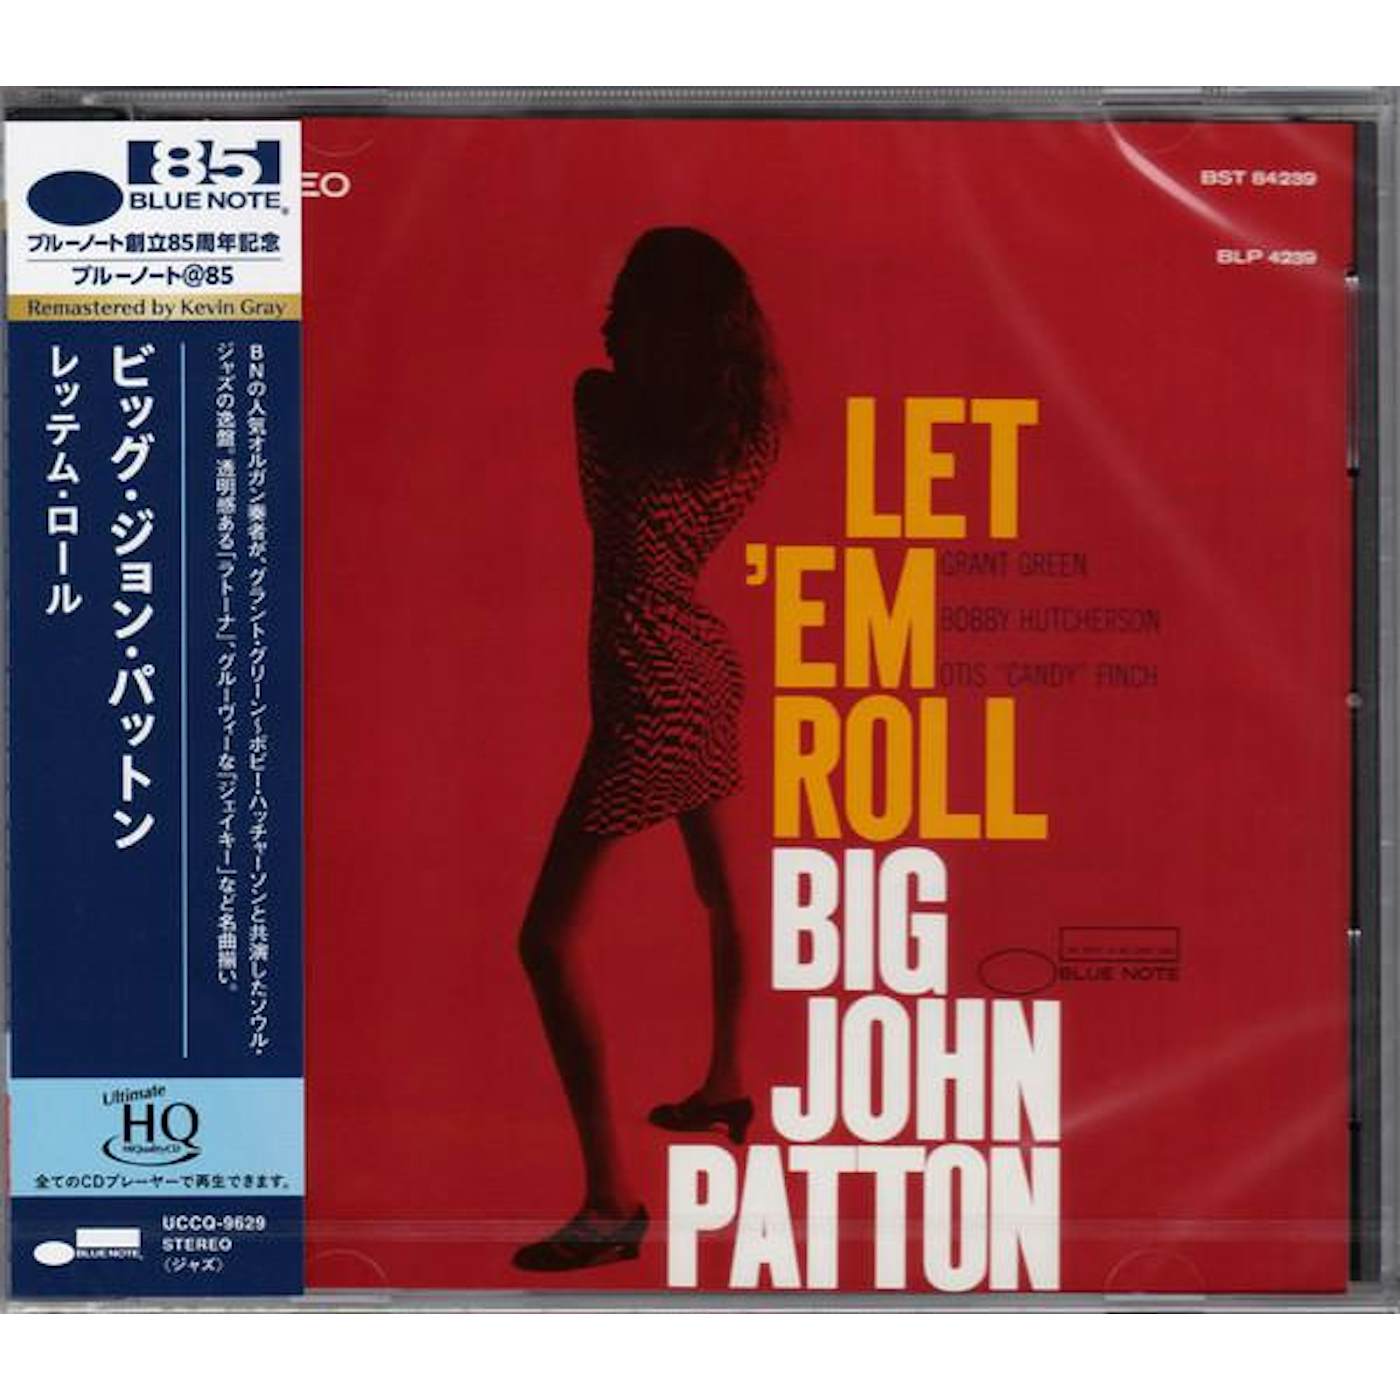 Big John Patton LET EM' ROLL (UHQCD) (BLUE NOTE 85TH ANNIVERSARY EDITION/REMASTERED BY KEVIN GRAY) CD